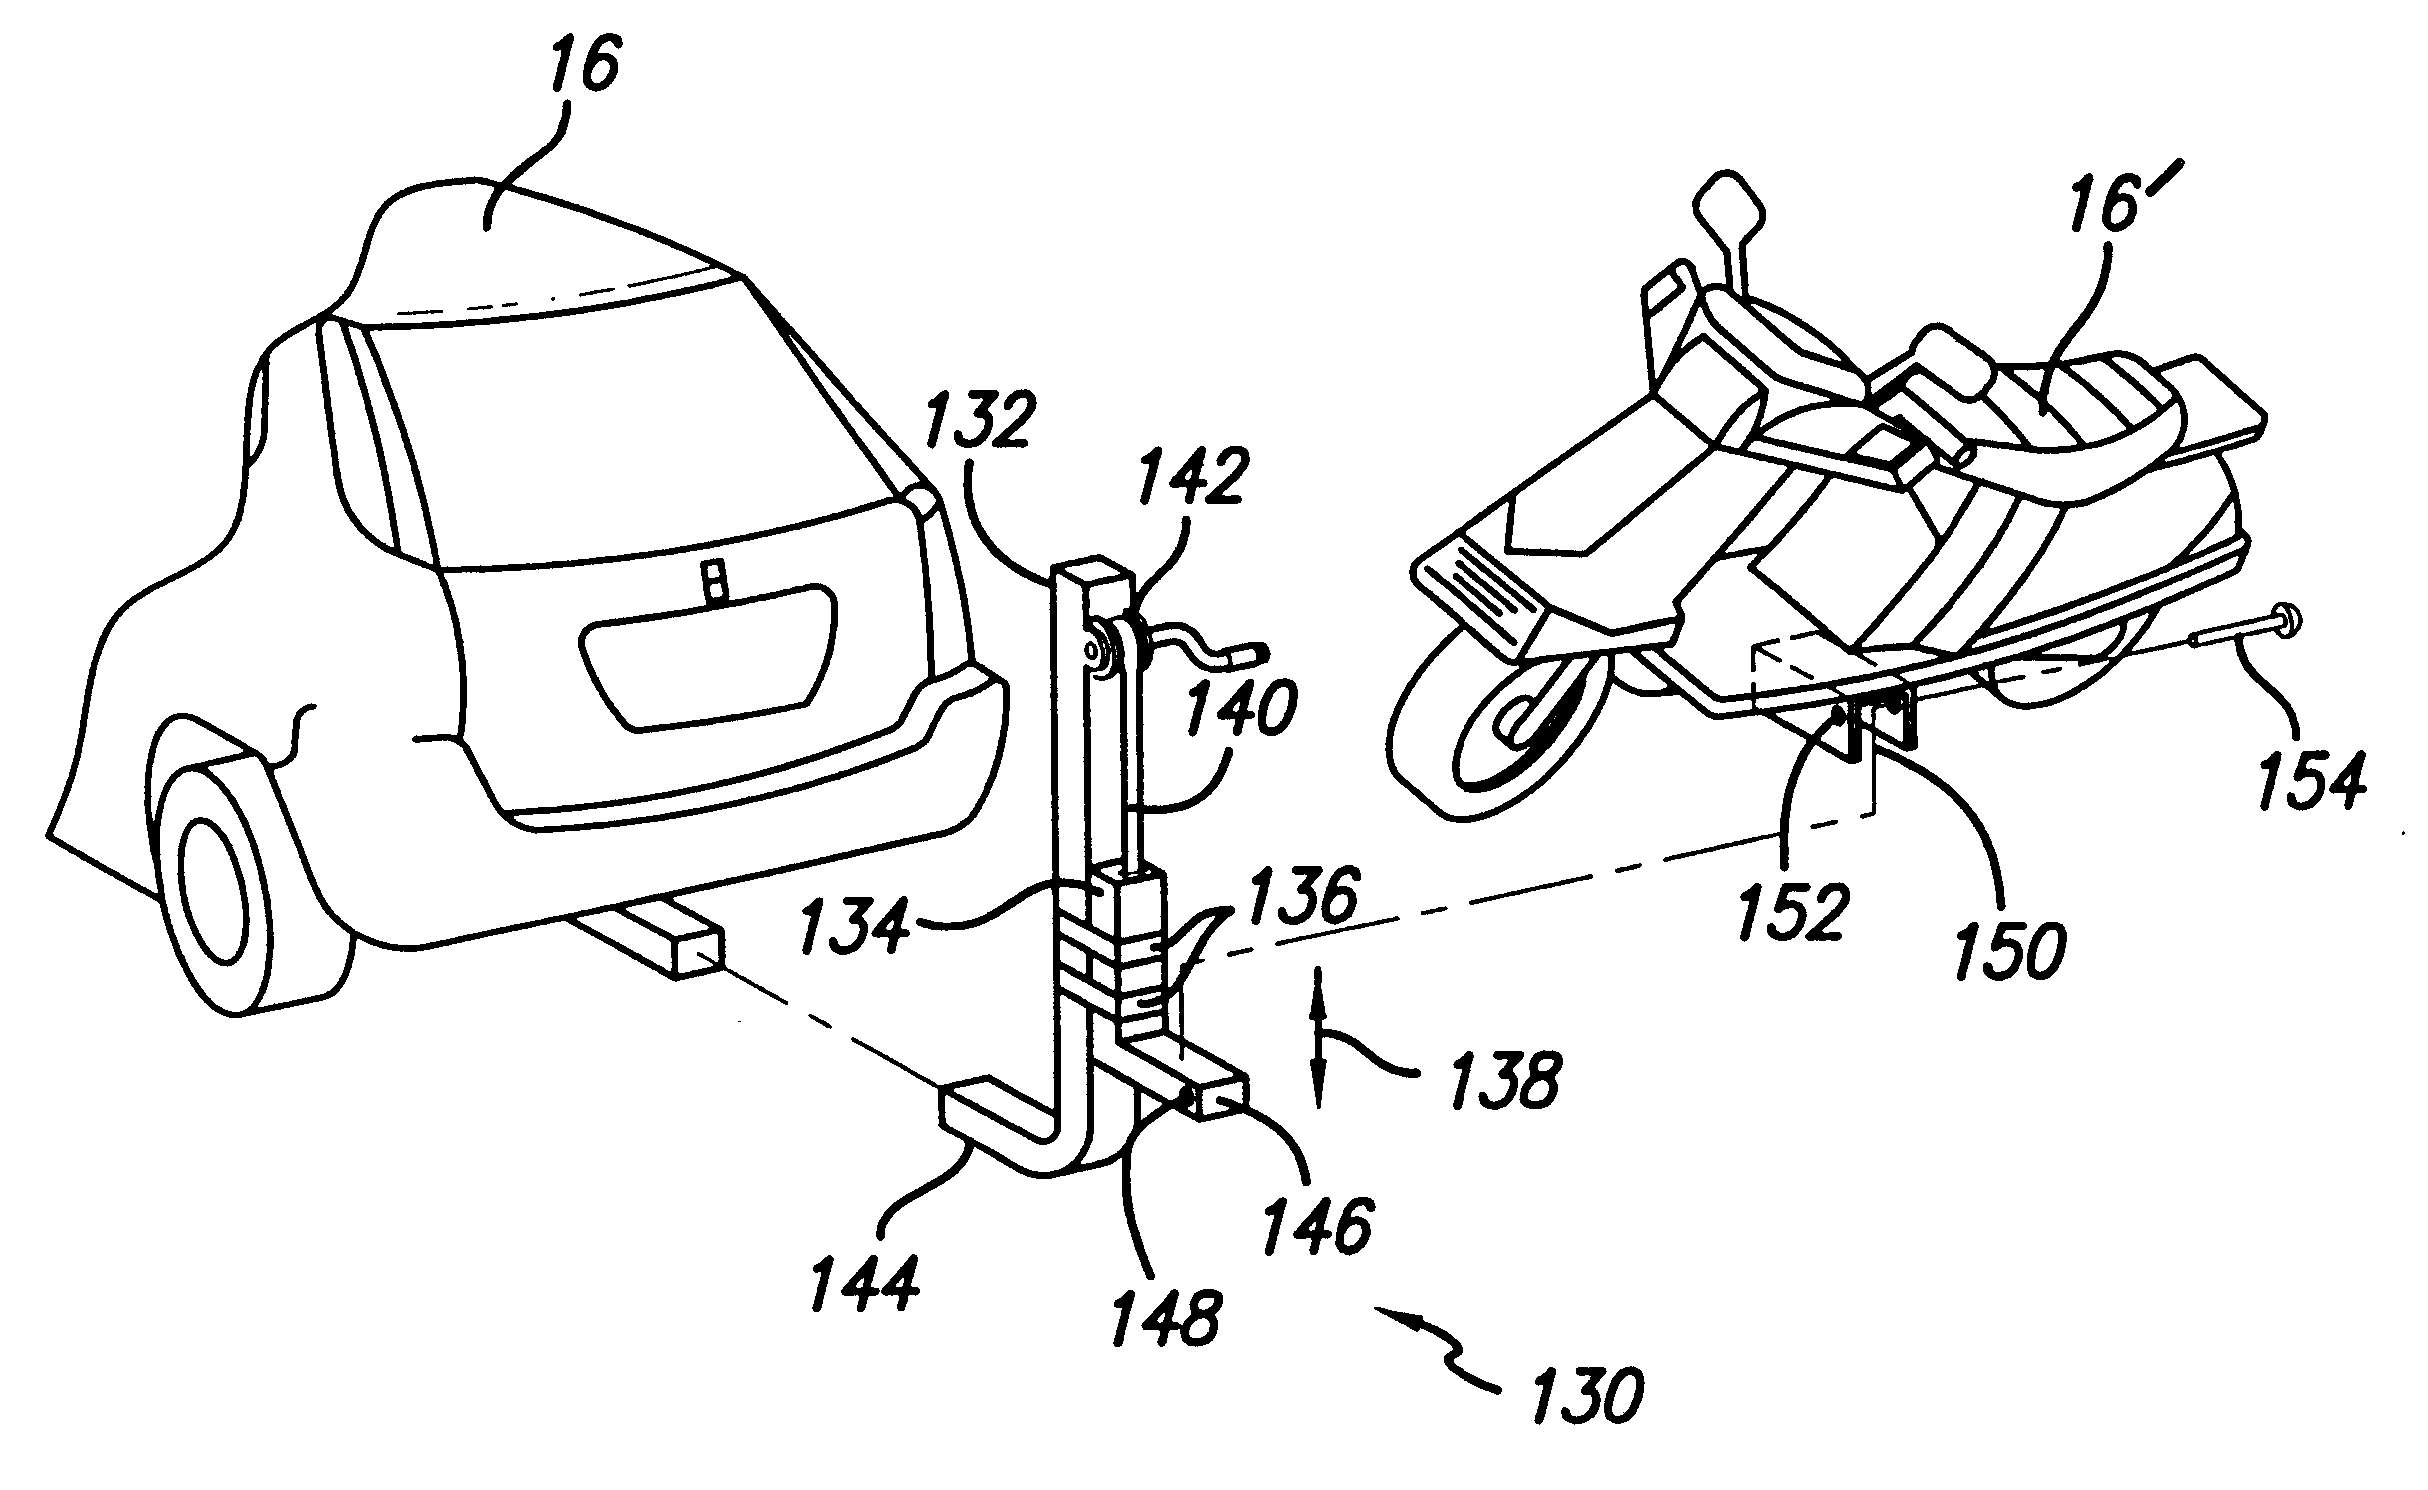 Shared vehicle system and method with system for carrying a first vehicle with a second vehicle